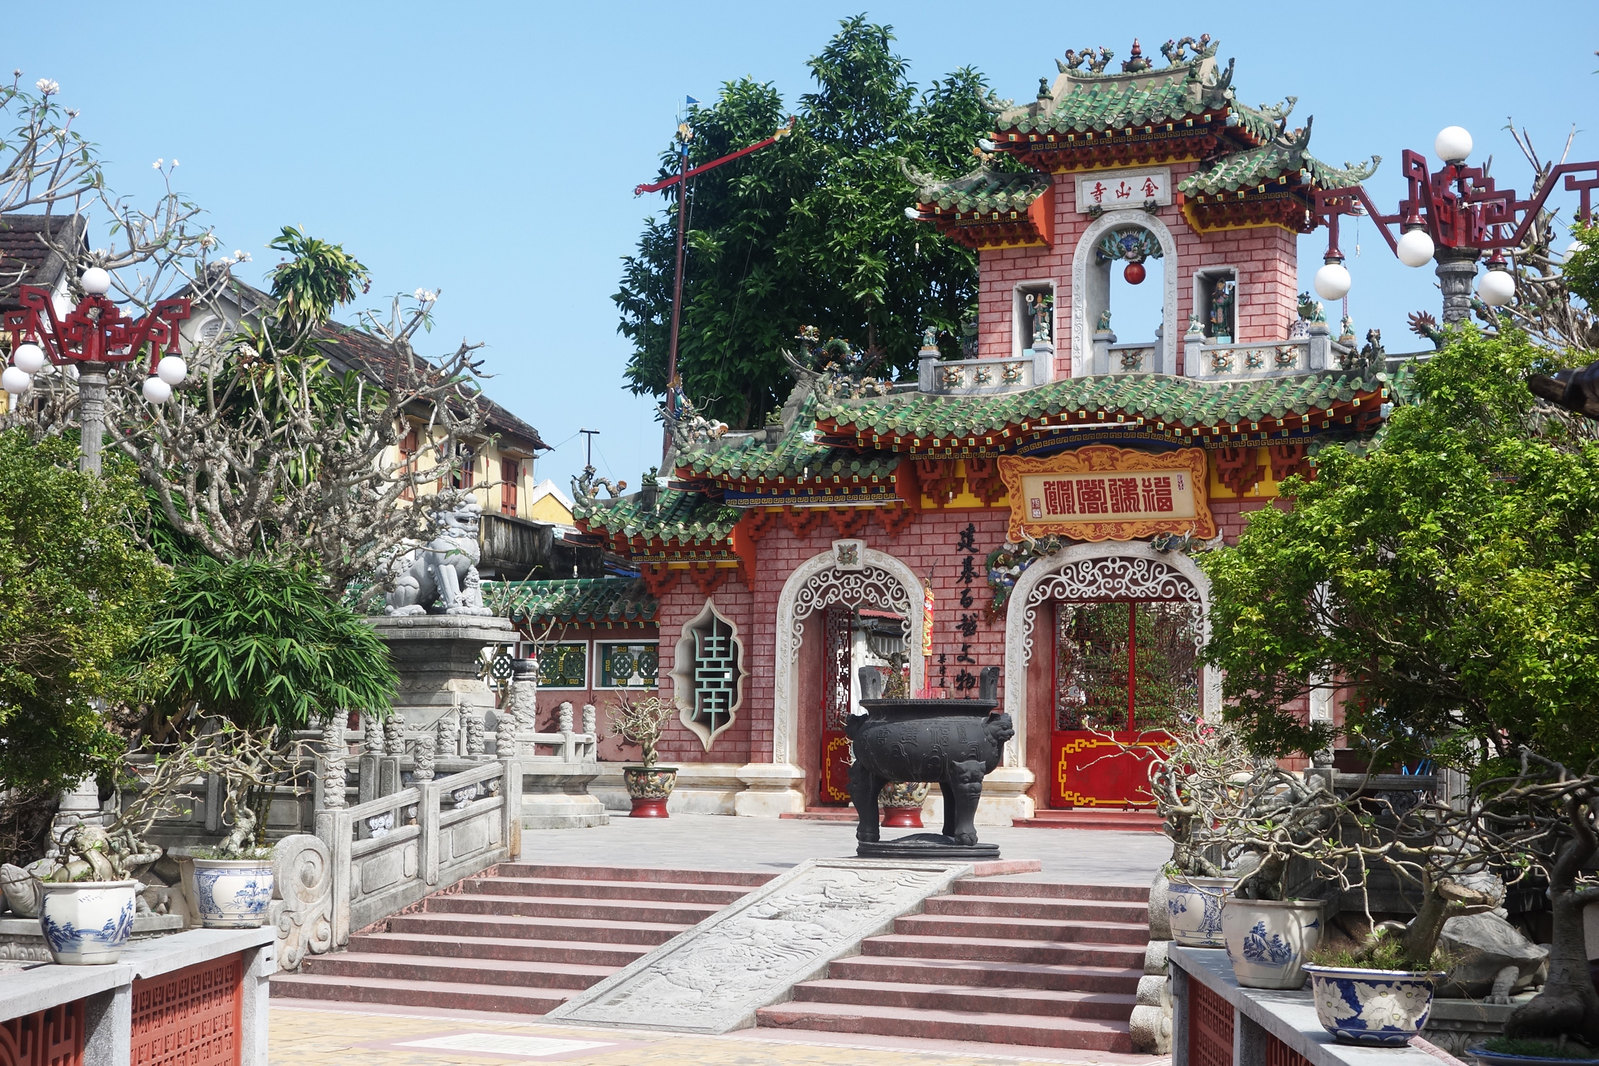 City Of Hoi An Has Exceptional Vietnam Charm